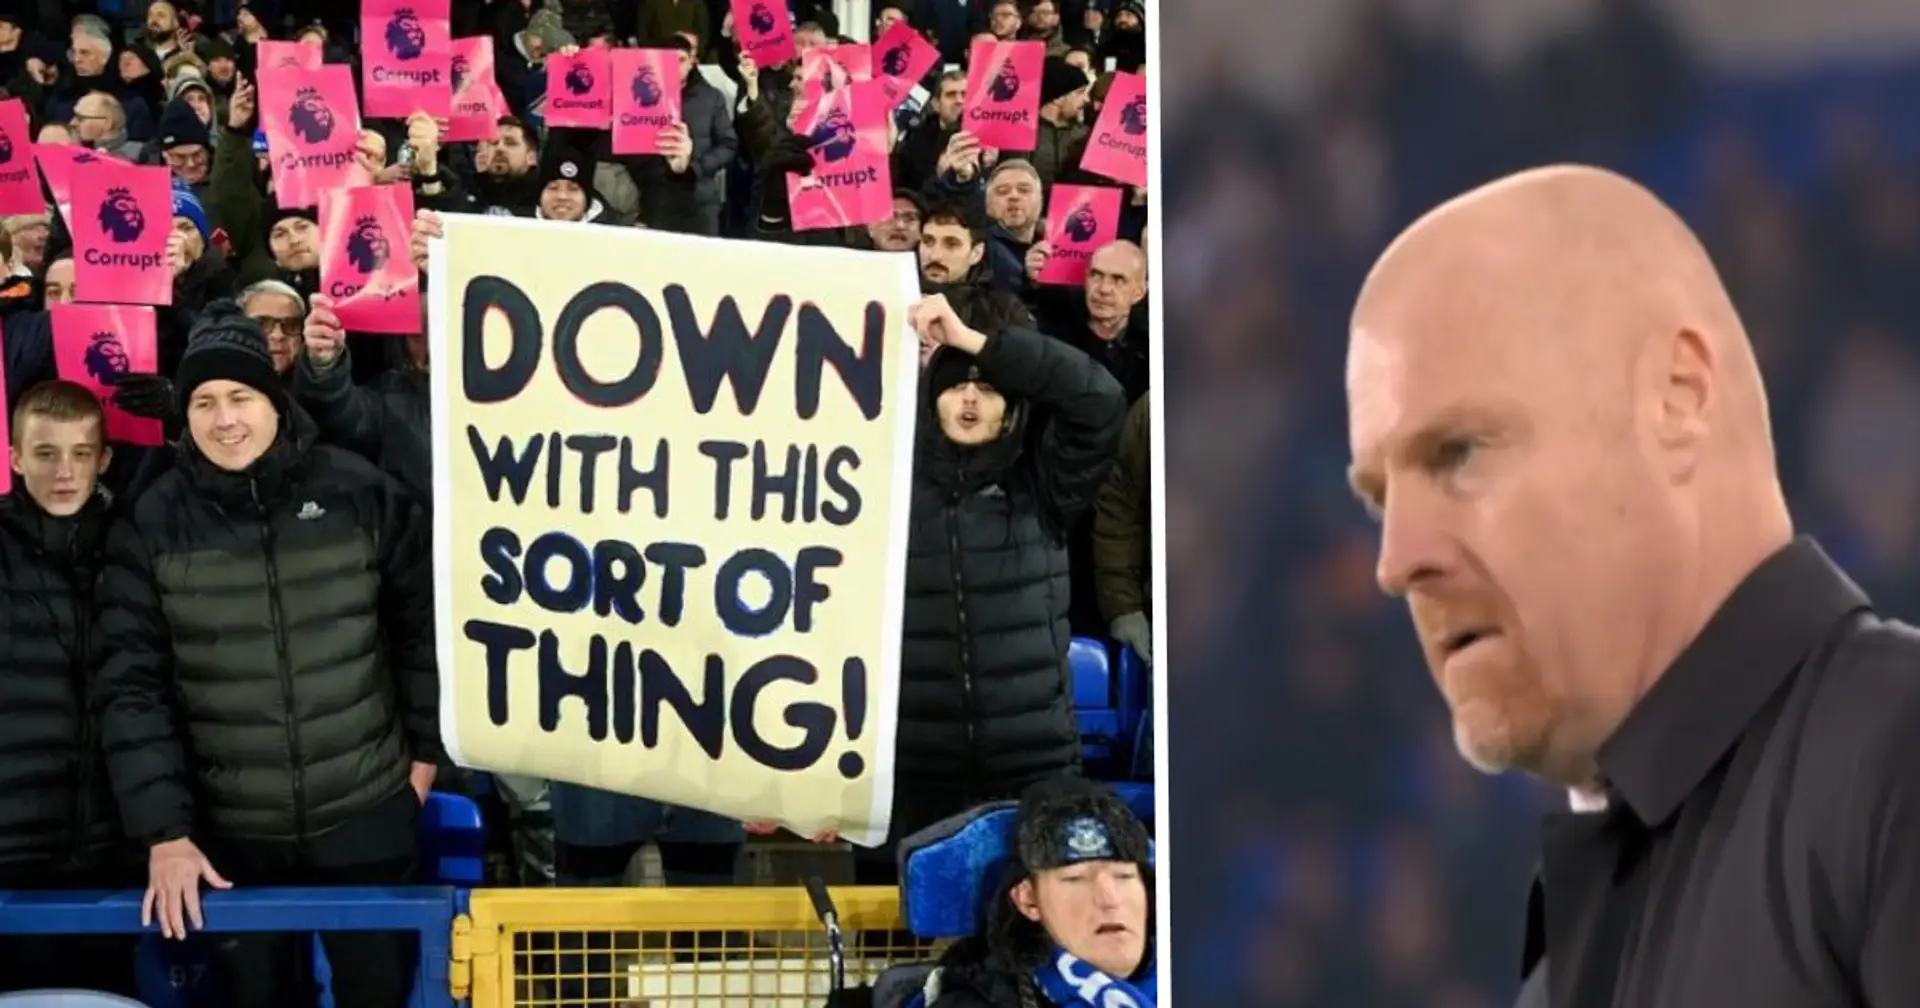 Everton lose their first game since 10 points deduction as Goodison Park painted pink with 'corrupt' cards